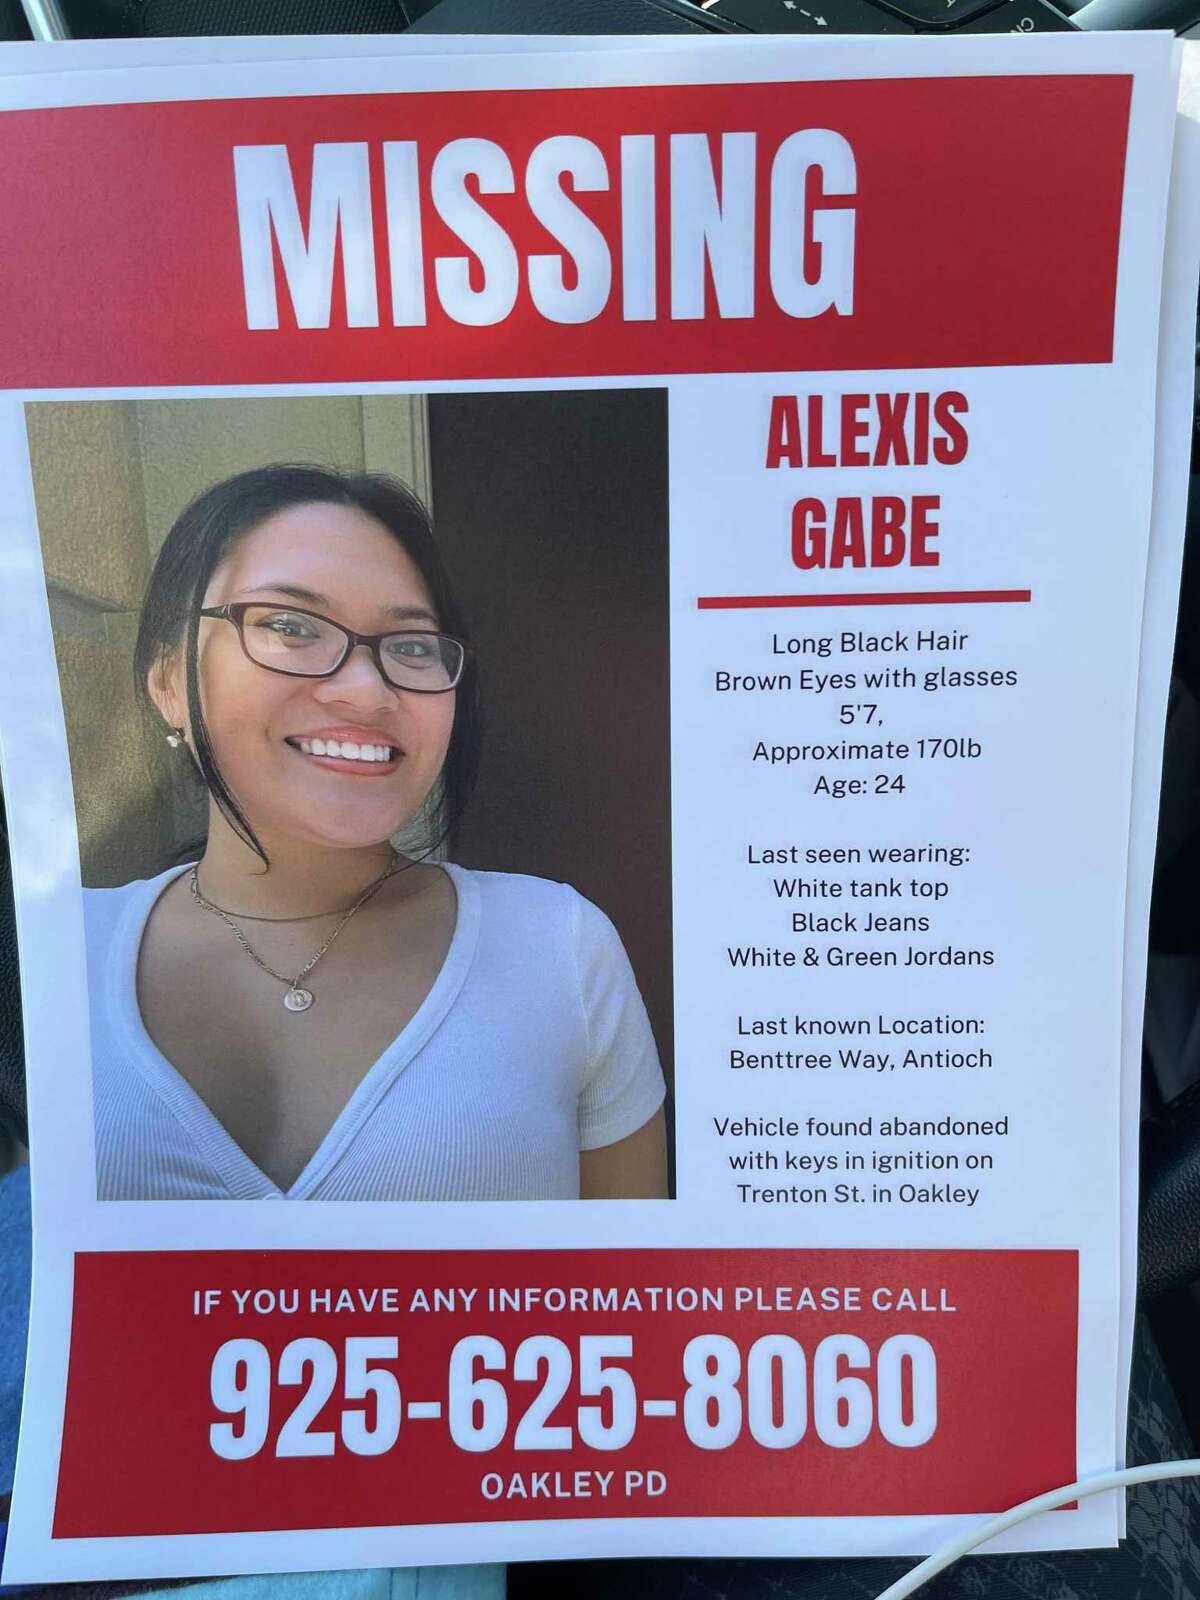 This file photograph shows a missing poster for Alexis Gabe, a 24-year-old woman from Oakley who was last seen in January 2022.